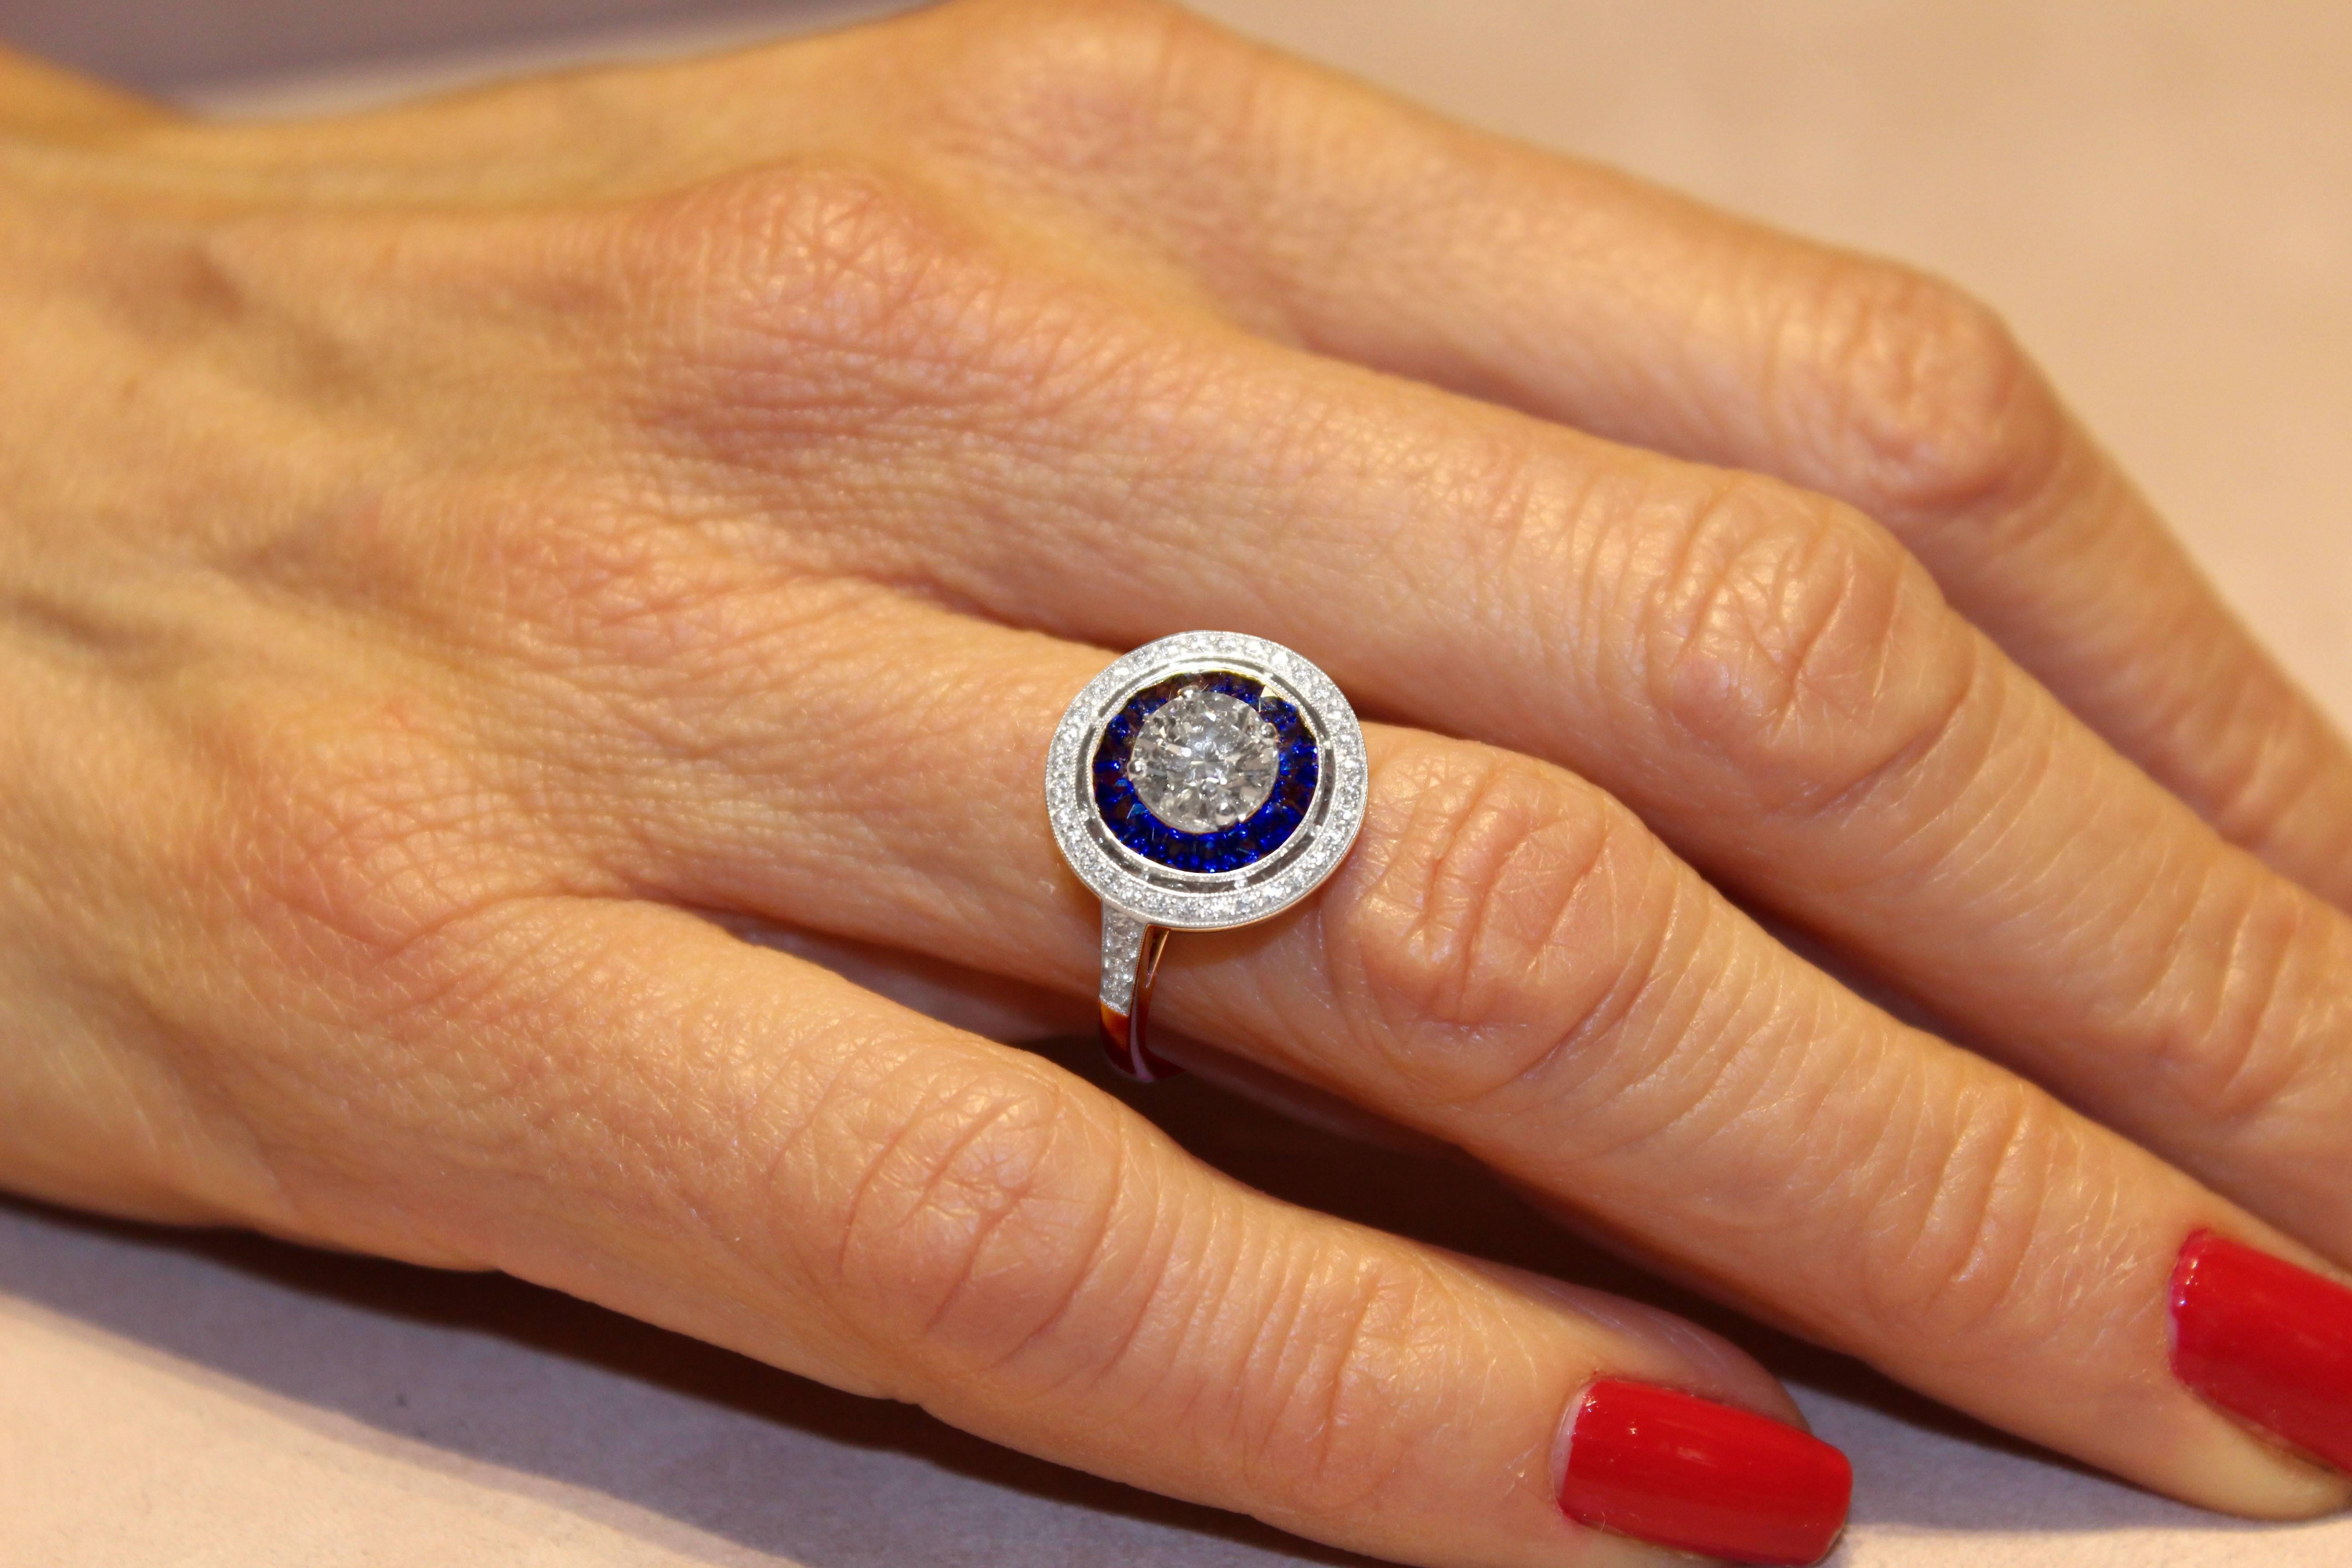 The 'Victorine' ring, designed in an Art Deco canted round shape is mounted in 18k white gold and showcases an exceptional 0.80 H VS1 brilliant-cut diamond, framed with a row of caliber cut sapphires weighing 0.50 carat, surrounded with a row of